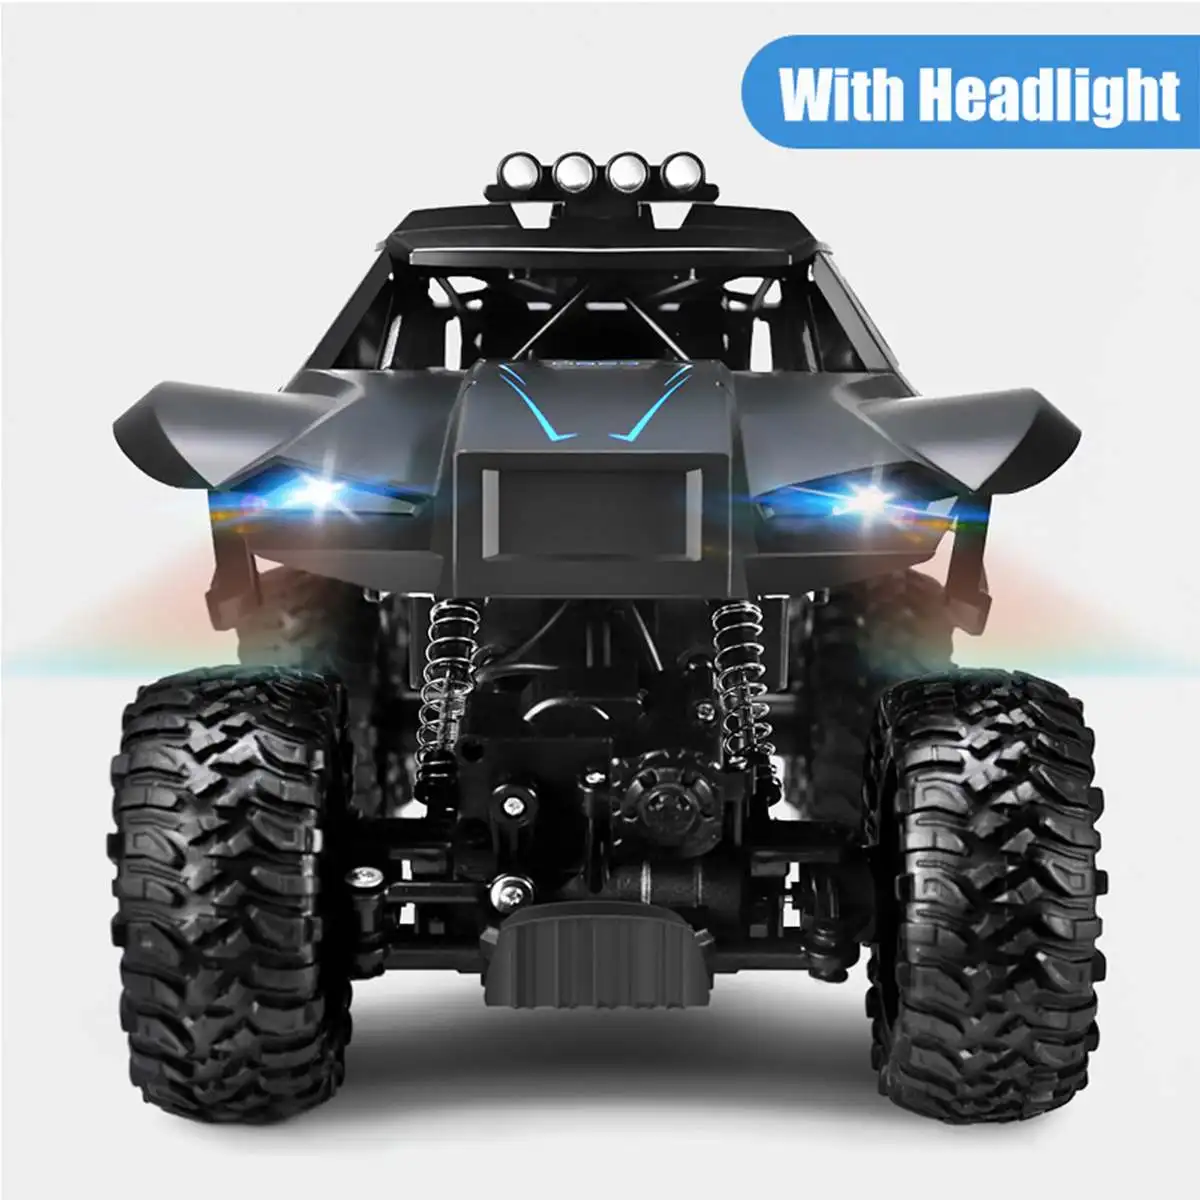 1/12 6WD Off-road RC Car Truck 2.4G Radio Controlled Car with Headlight Electric Vehicle Models Toys for Children enlarge